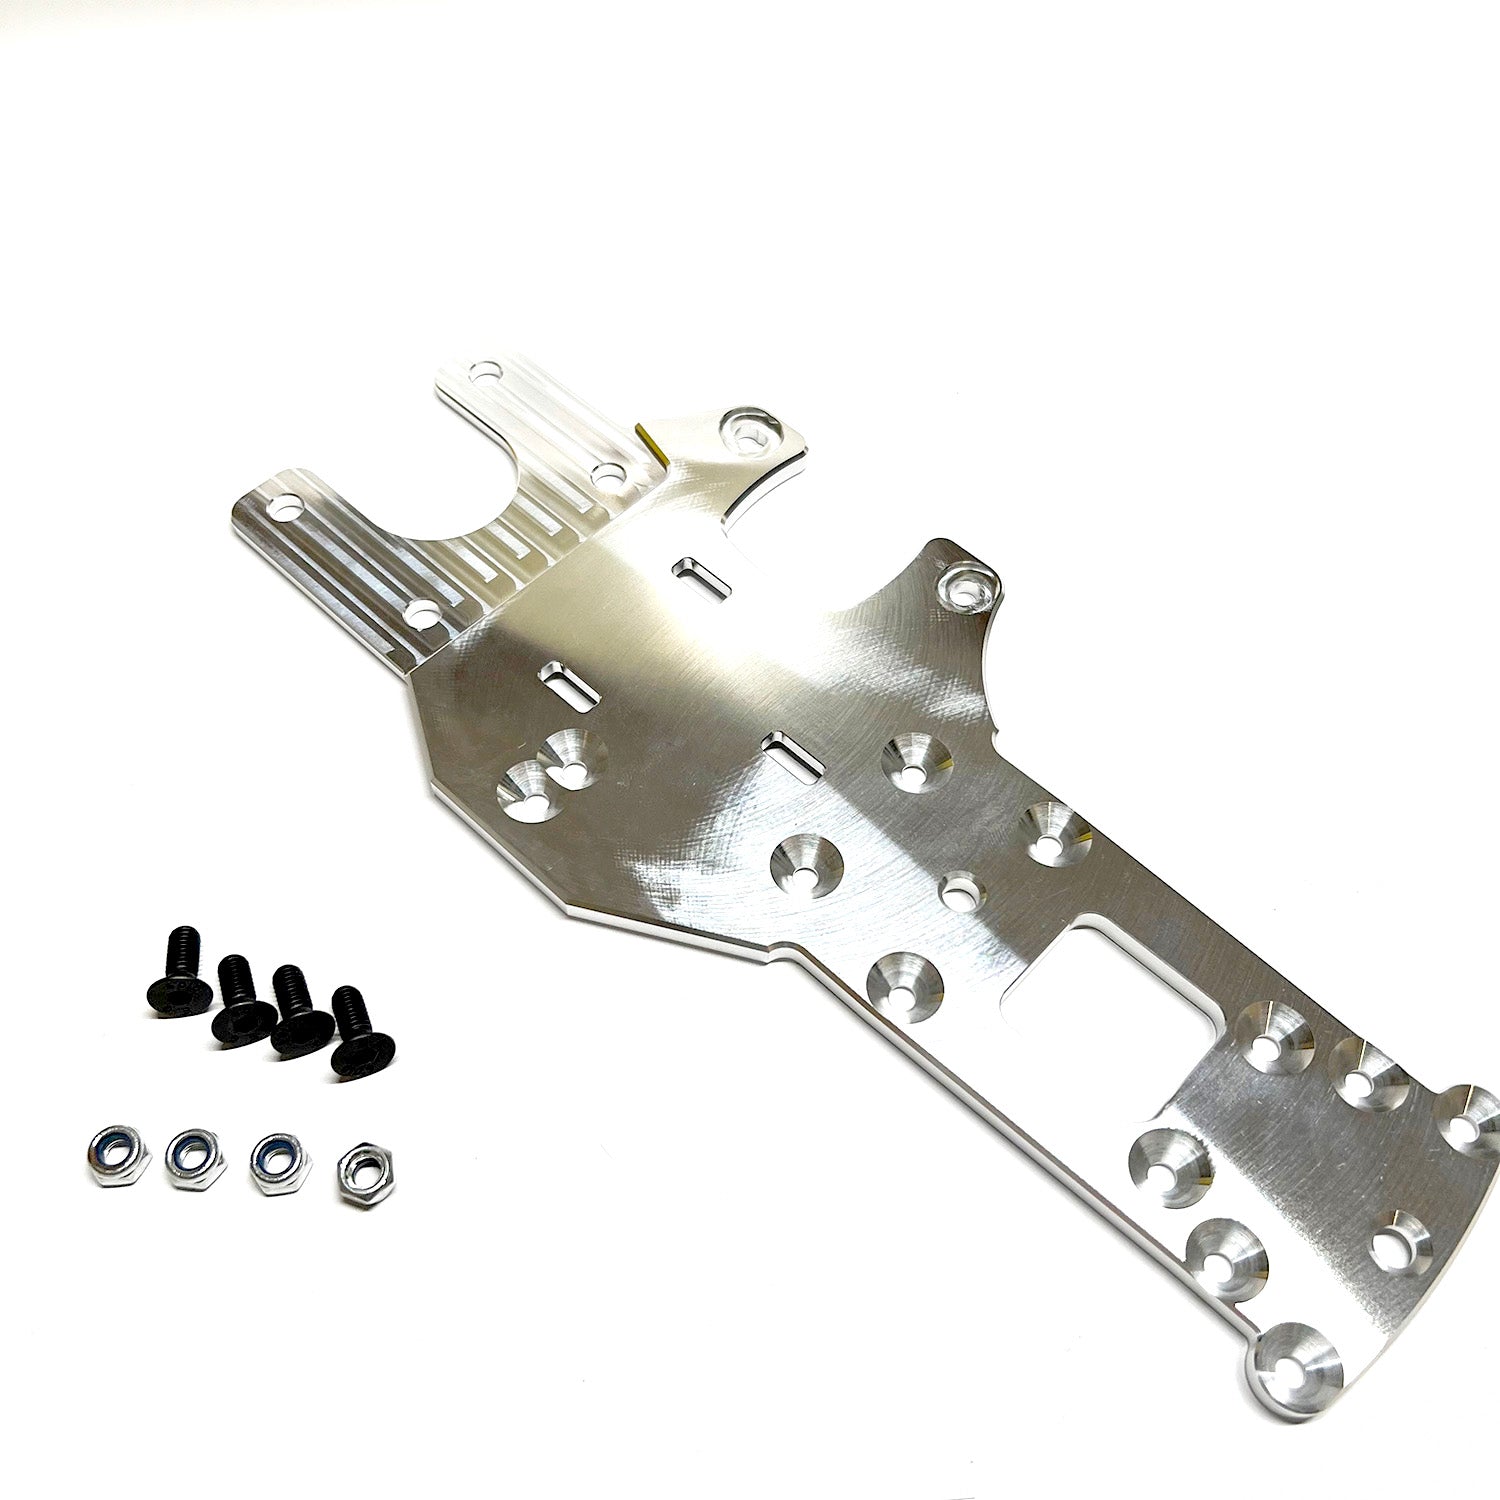 C4RC Rear Chassis Plate for HPI Baja 5b/5T/5SC - AKILL RACING LIMITED